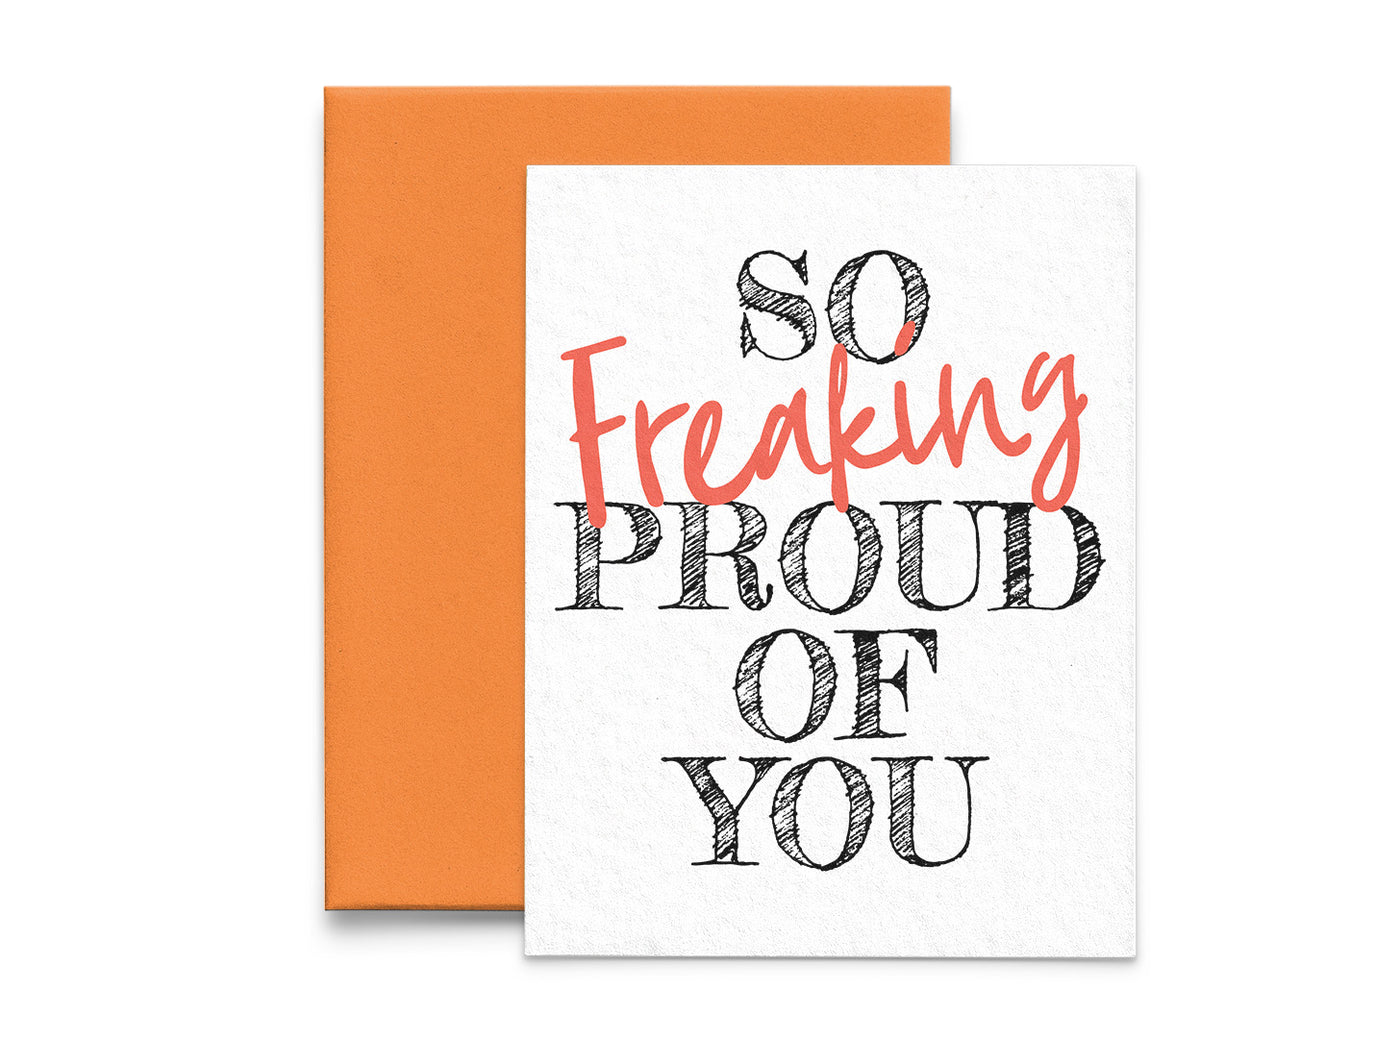 So Freaking Proud of You Encouragement Card